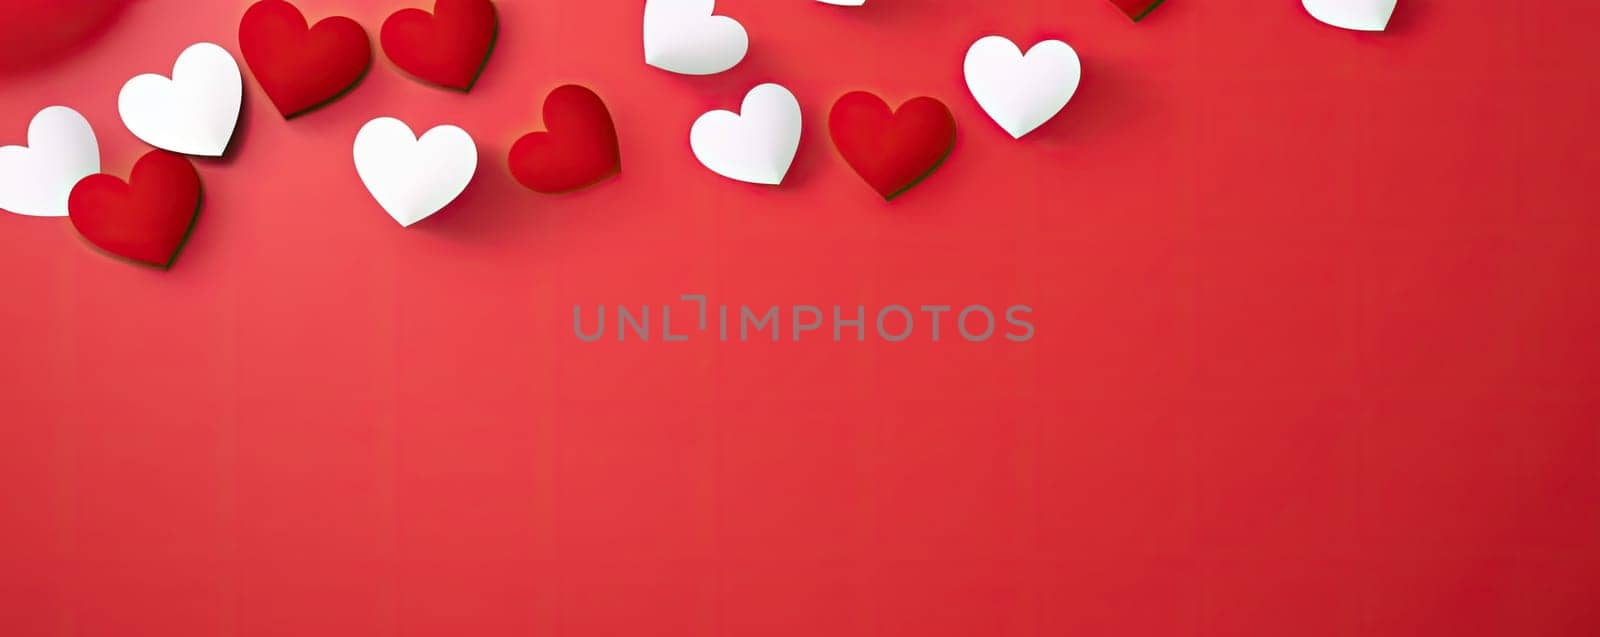 Rich red and white hearts on a deep red background create a rush of feelings and give the image brightness and emotional tension